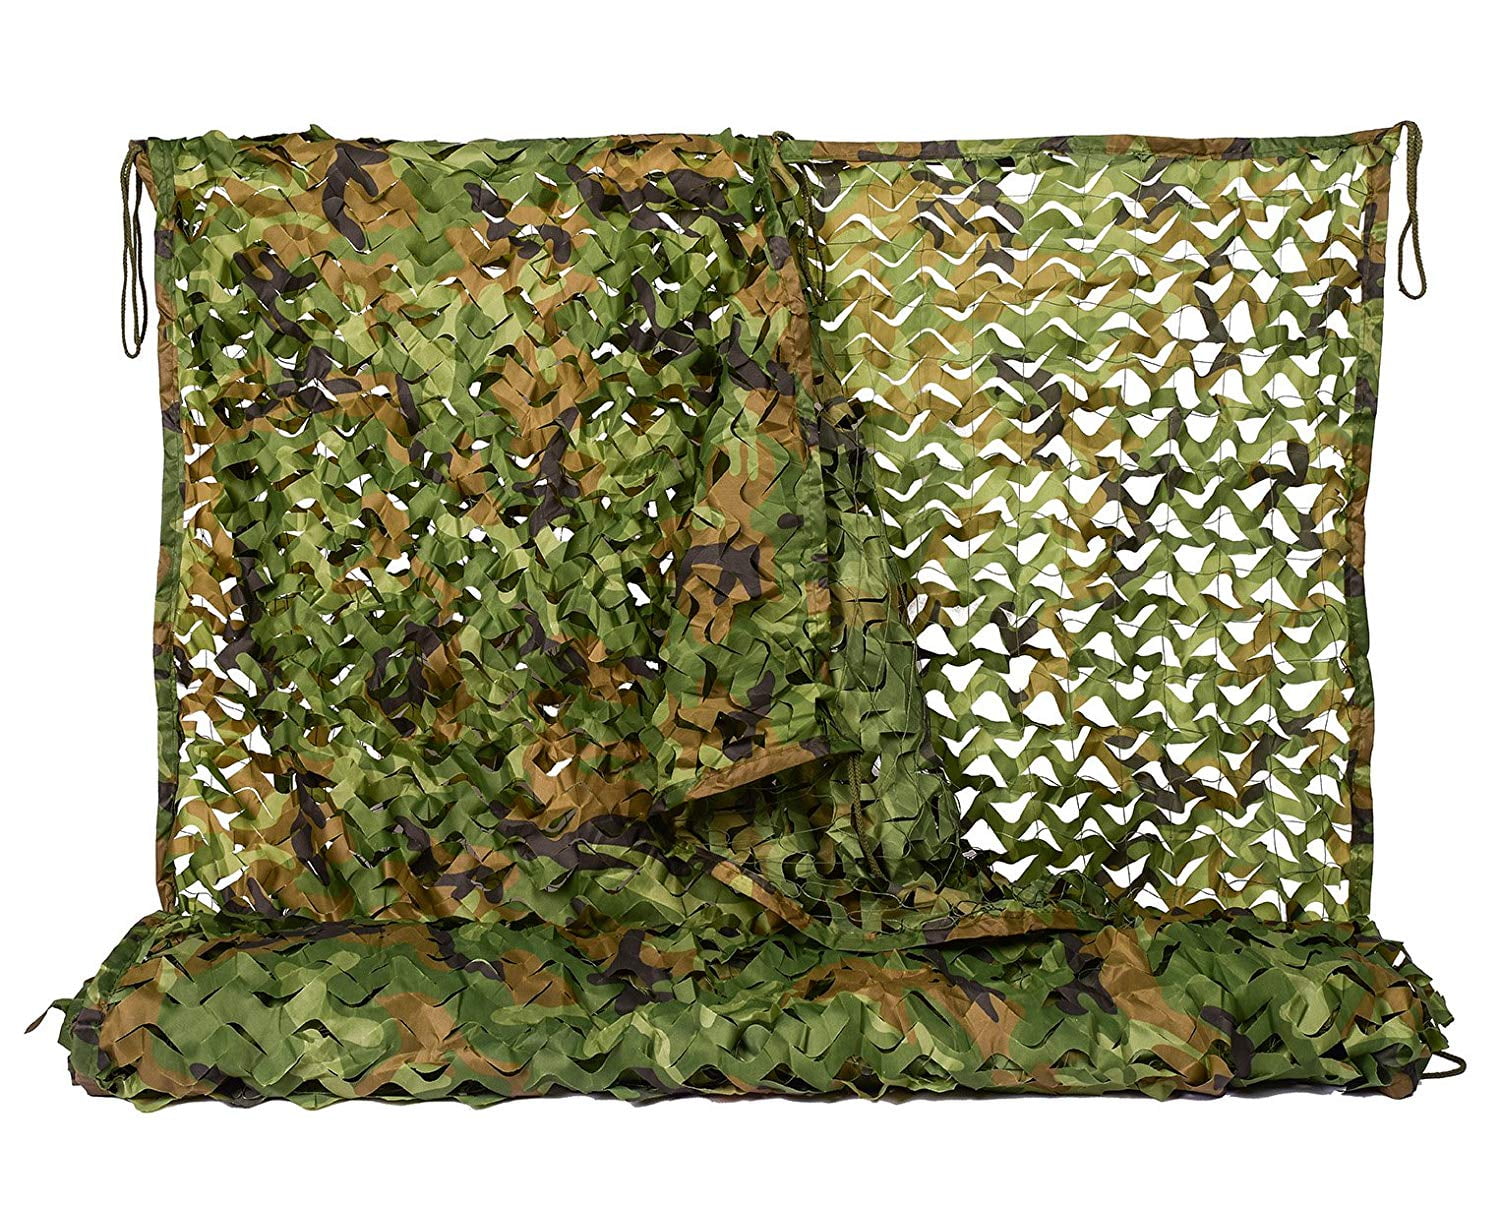 3 X 5M Woodland Hunting Camping Military Camouflage Netting Hide Camo Cover Net 